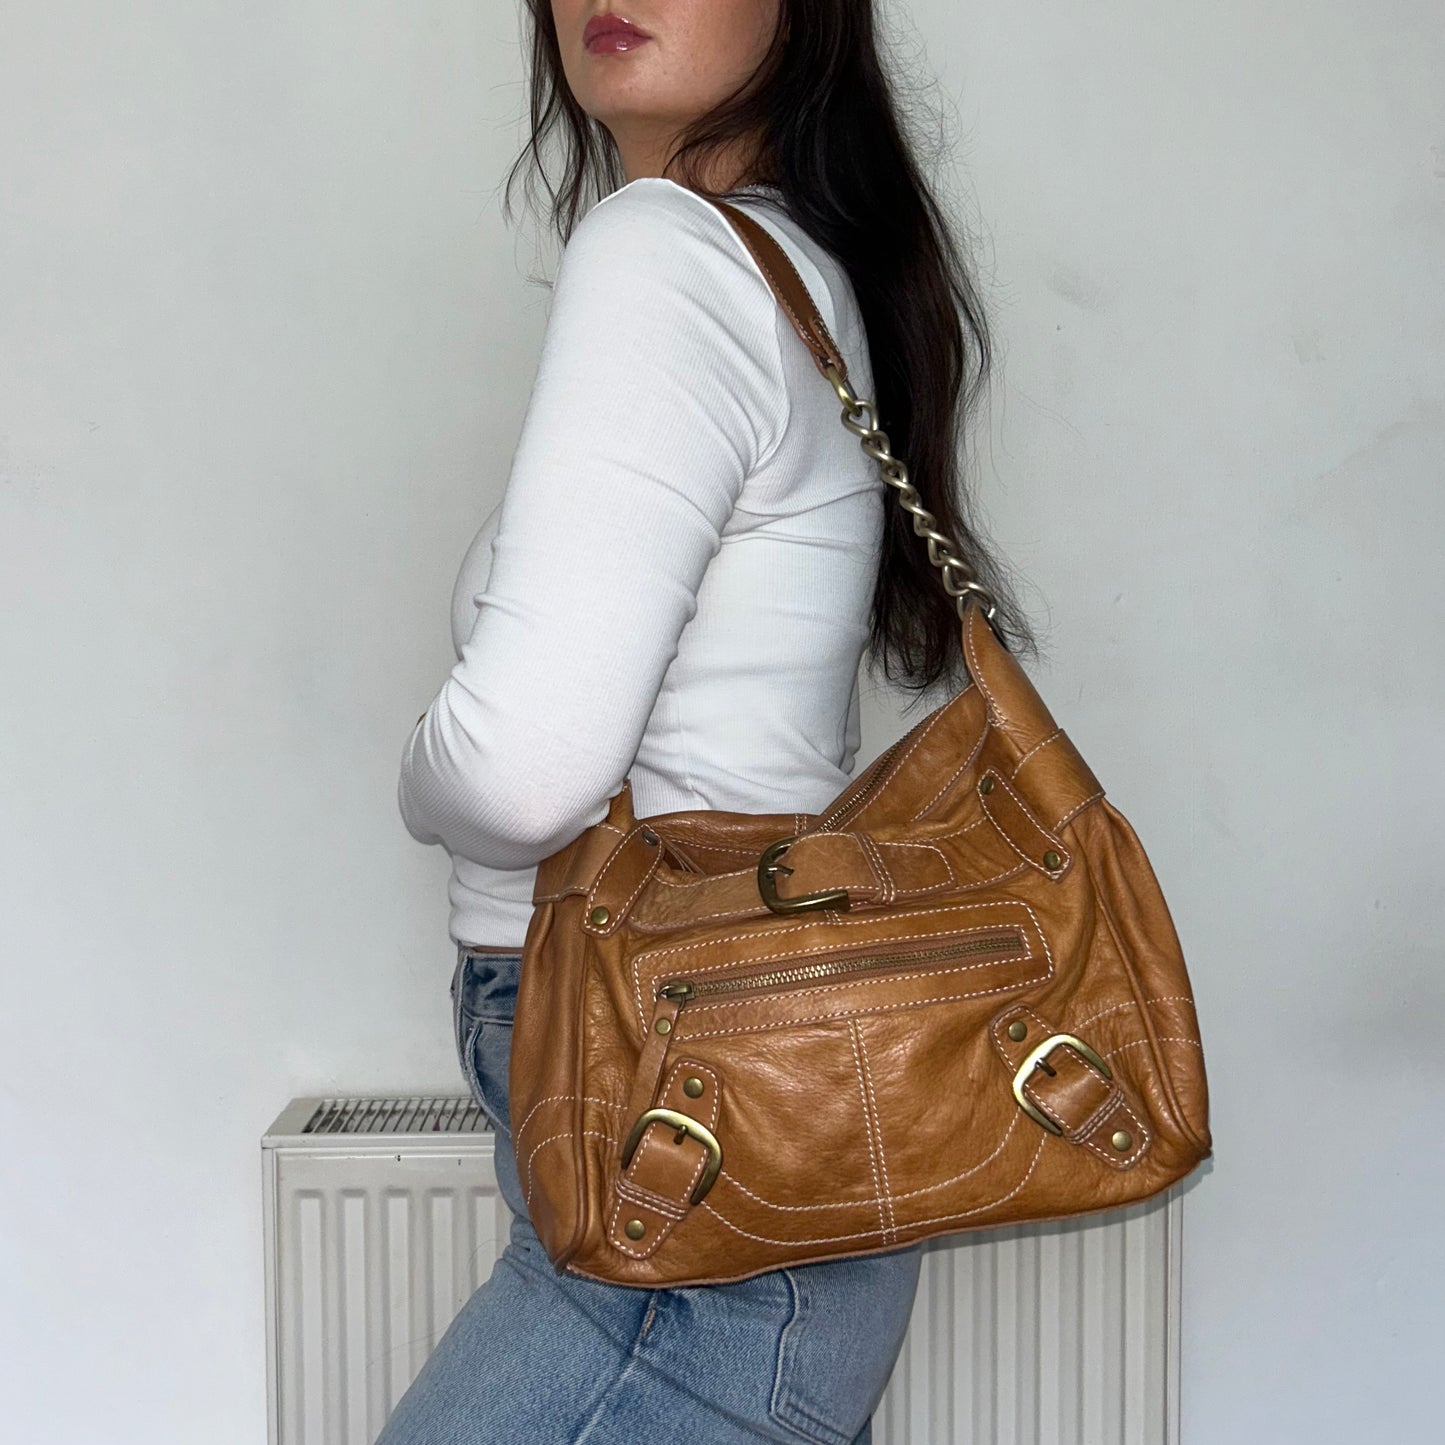 tan brown leather shoulder bag shown on a models shoulder wearing a white top and blue jeans